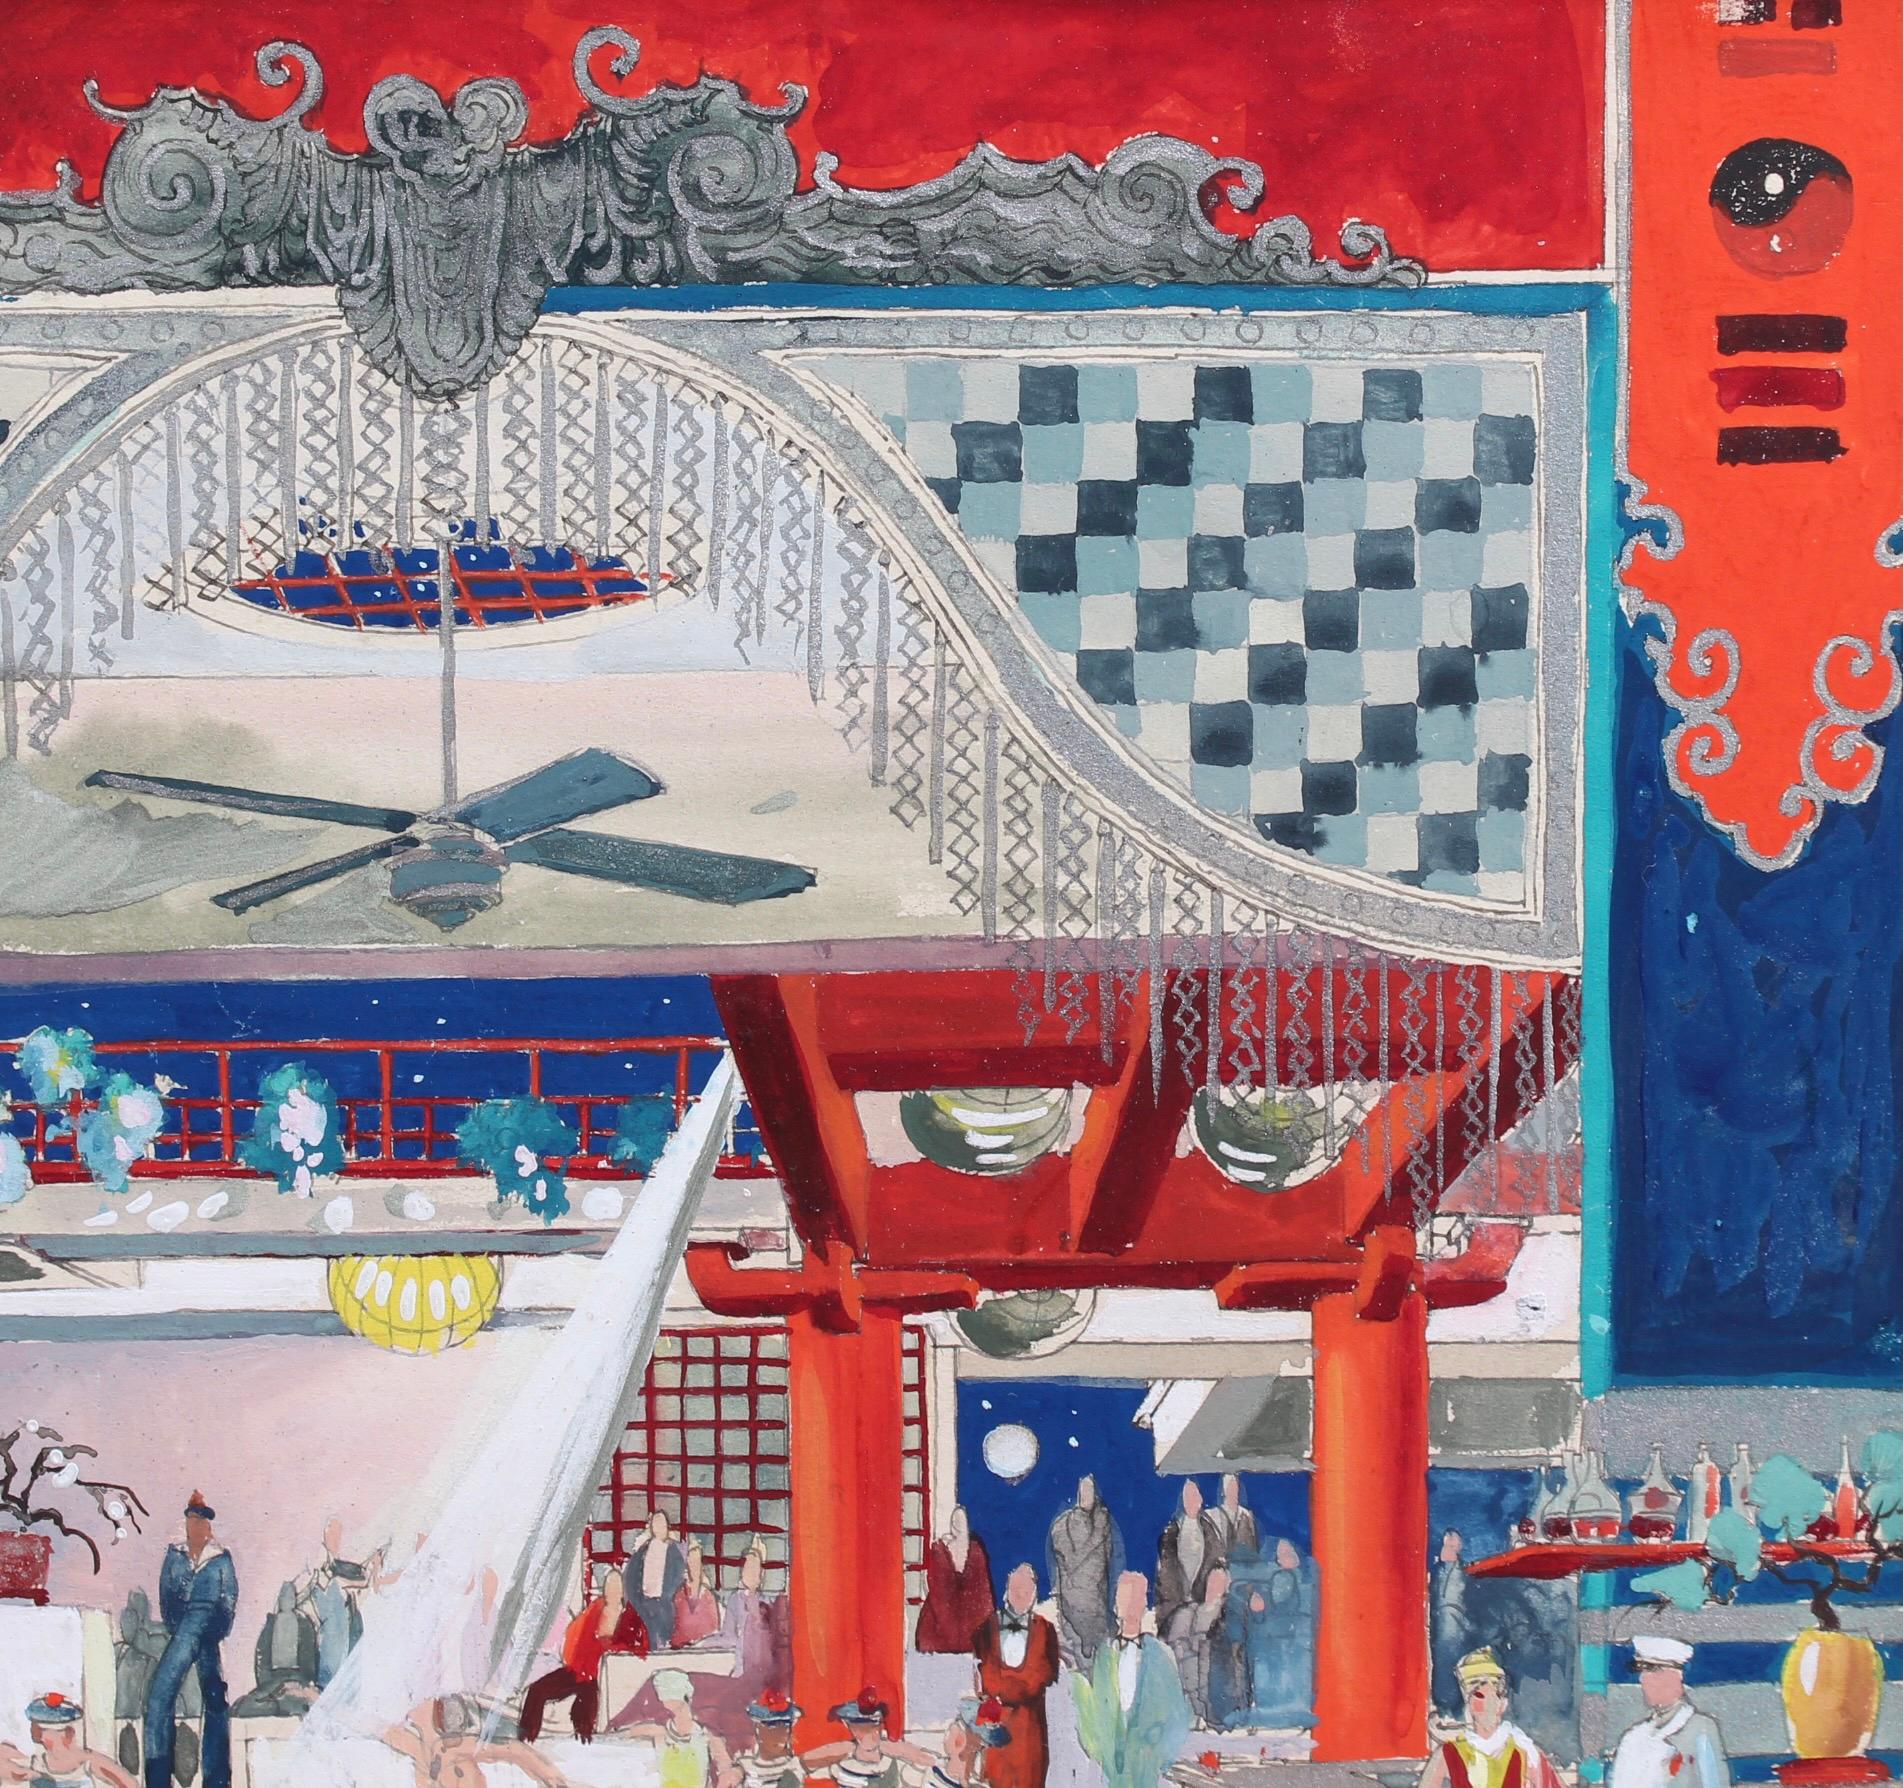 'Cabaret in an Asian Banquet Hall', pencil, gouache and metallic paint on card stock by an unnamed artist of the French School (20th Century). This is a fantastical port visit of the artist's imagination. It is a naive, but strangely compelling